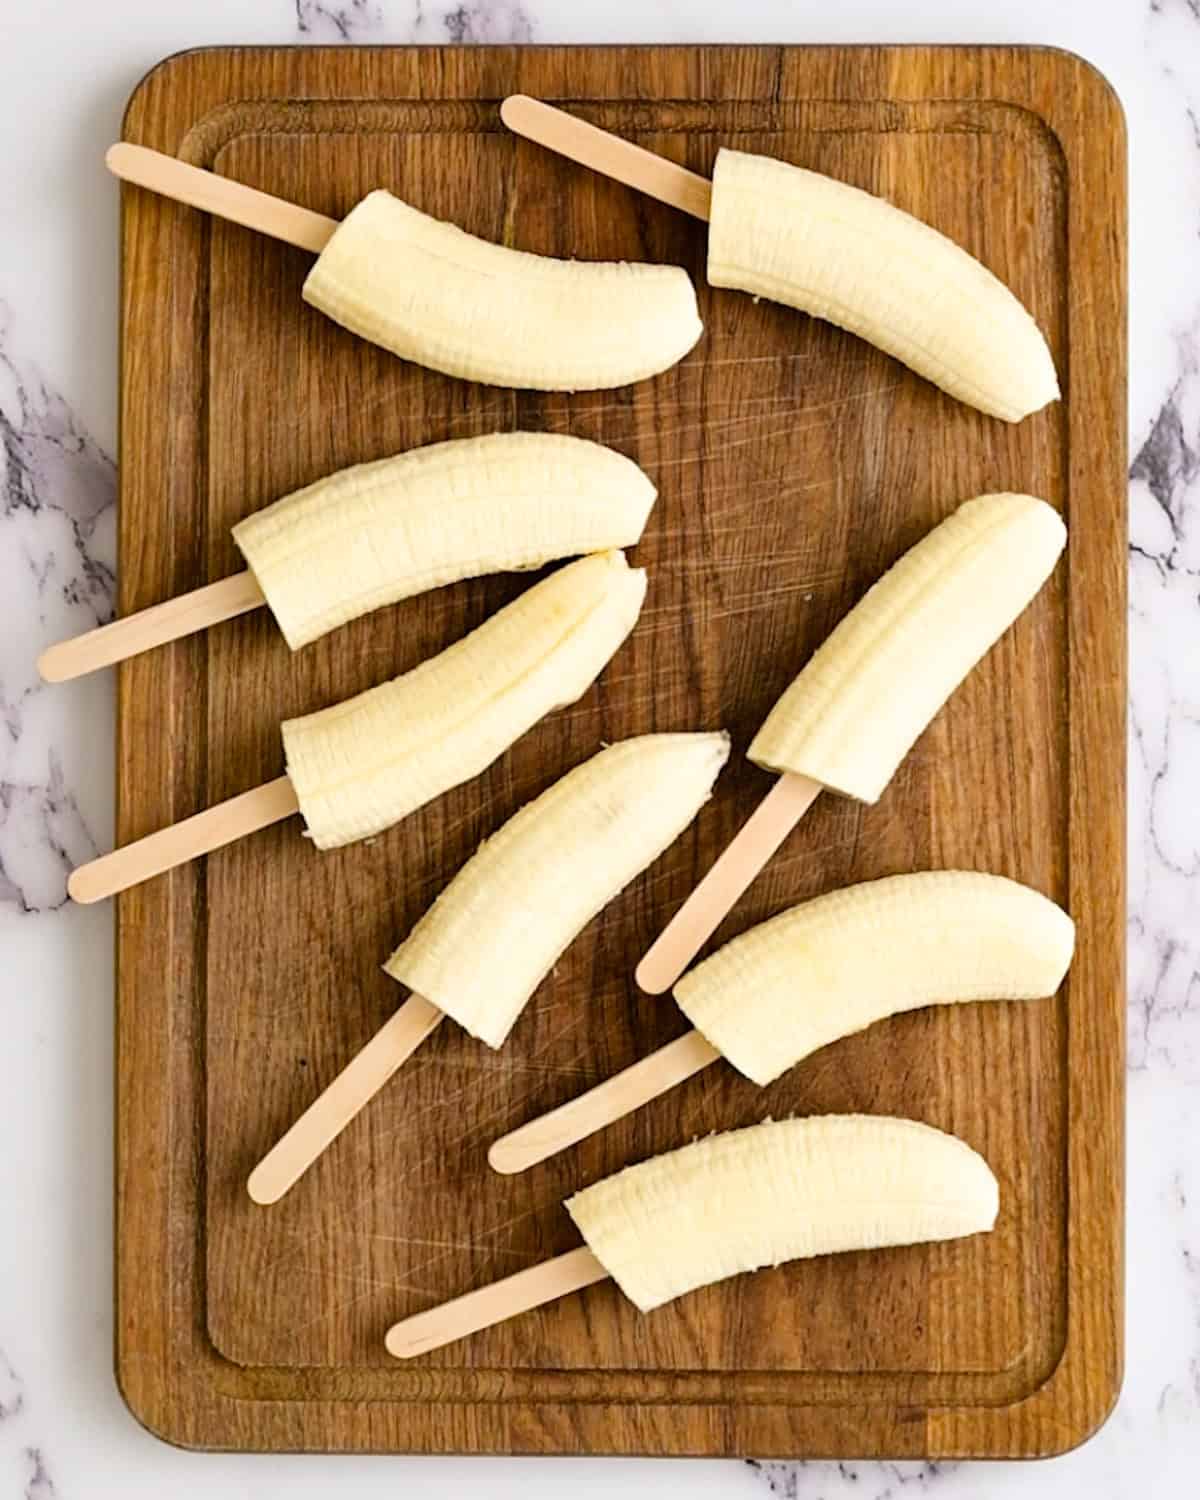 banana halves with popsicle sticks in them on a cutting board